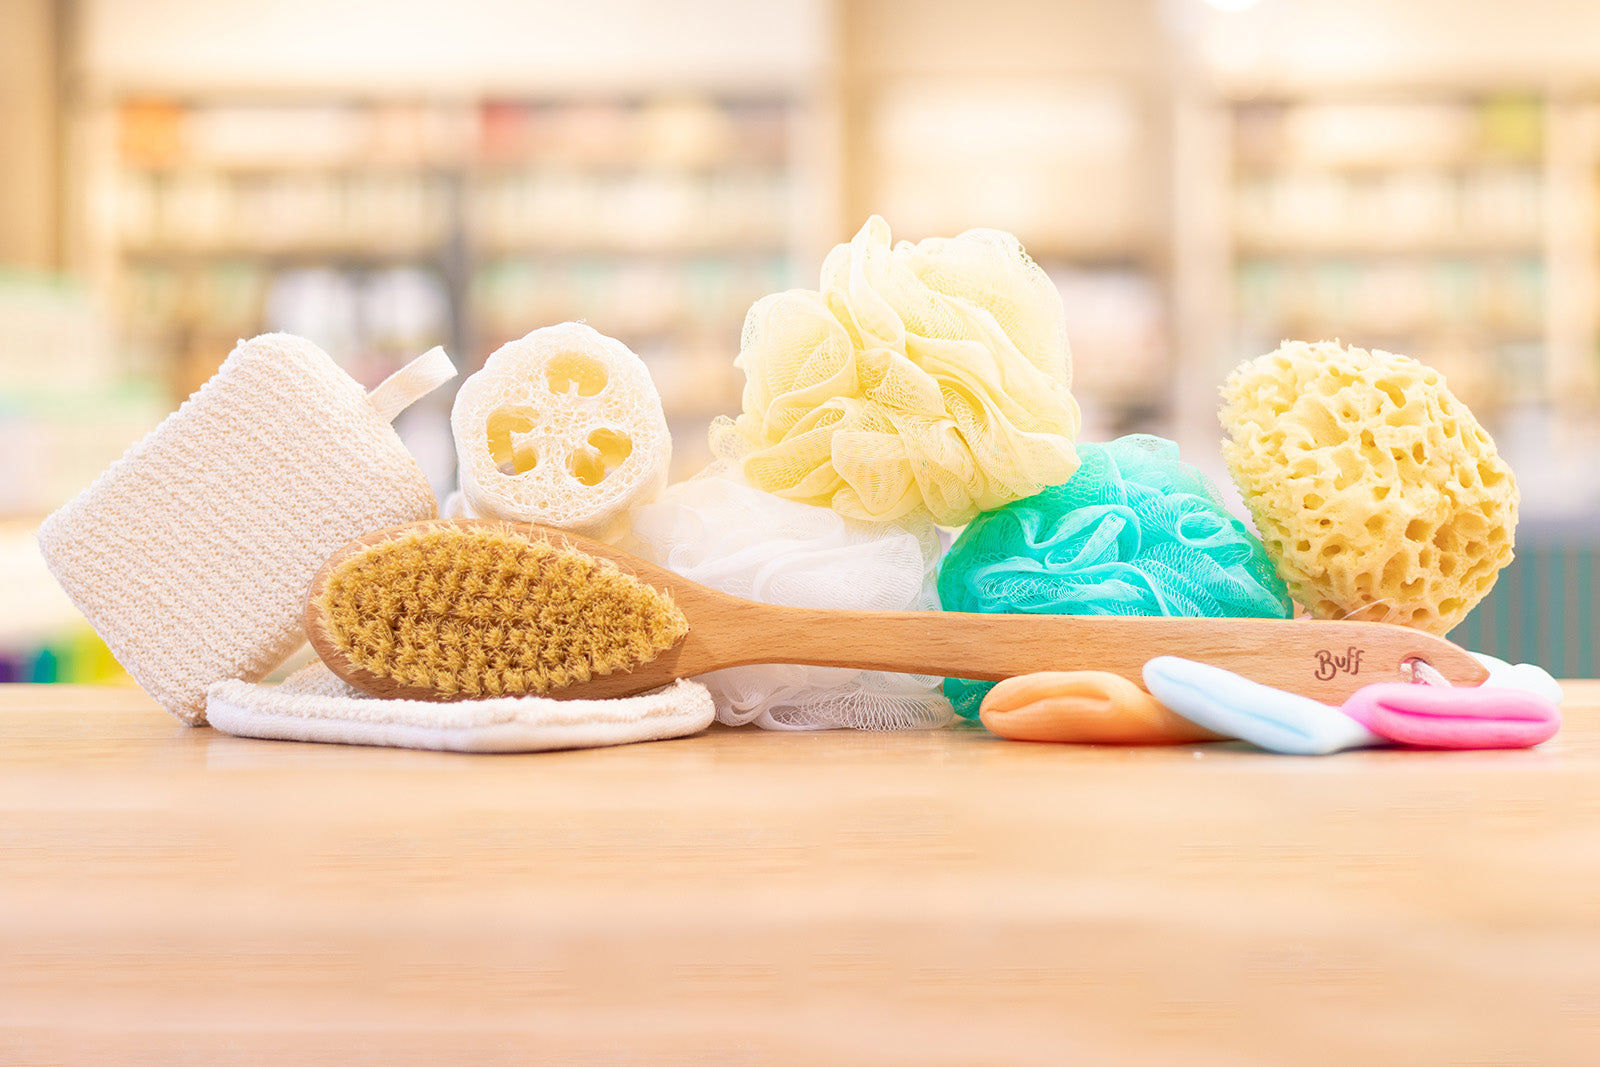 Sea sponge, soap sleeves, loofahs, and a body brush stacked on top of one another